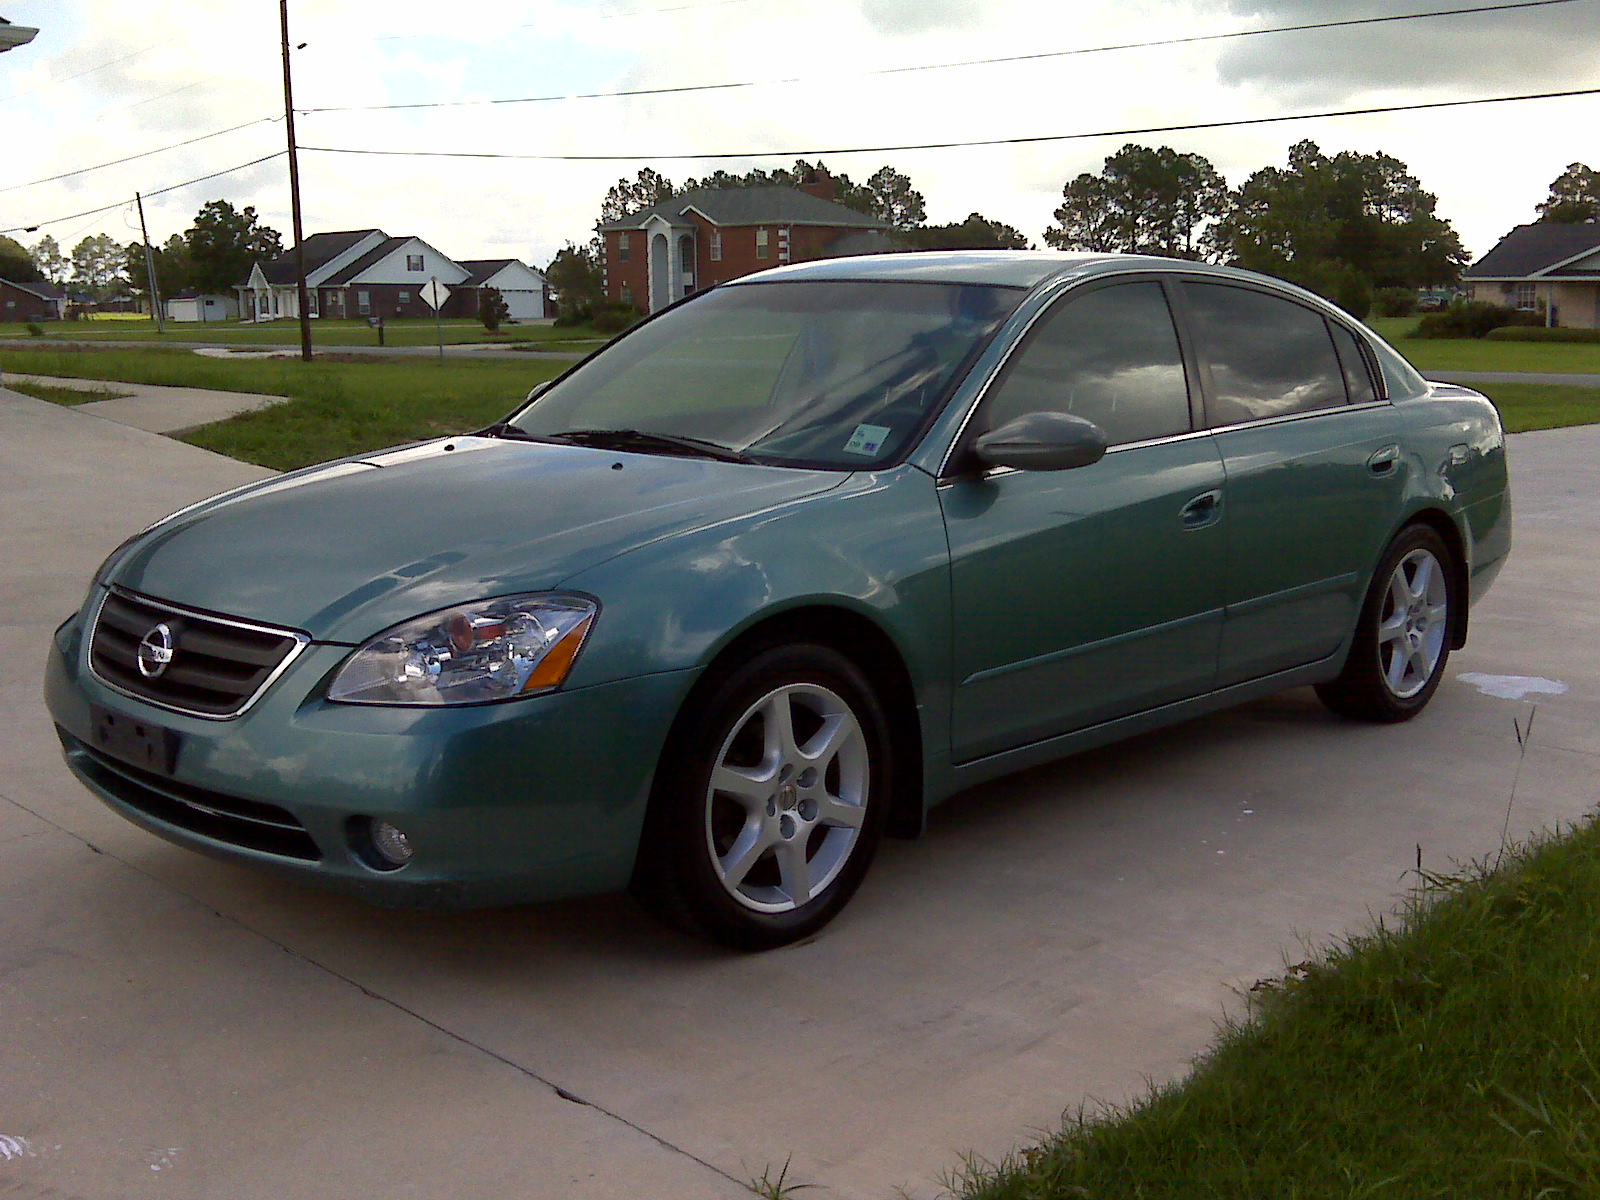 2003 Nissan altima 3.5 se specifications #4